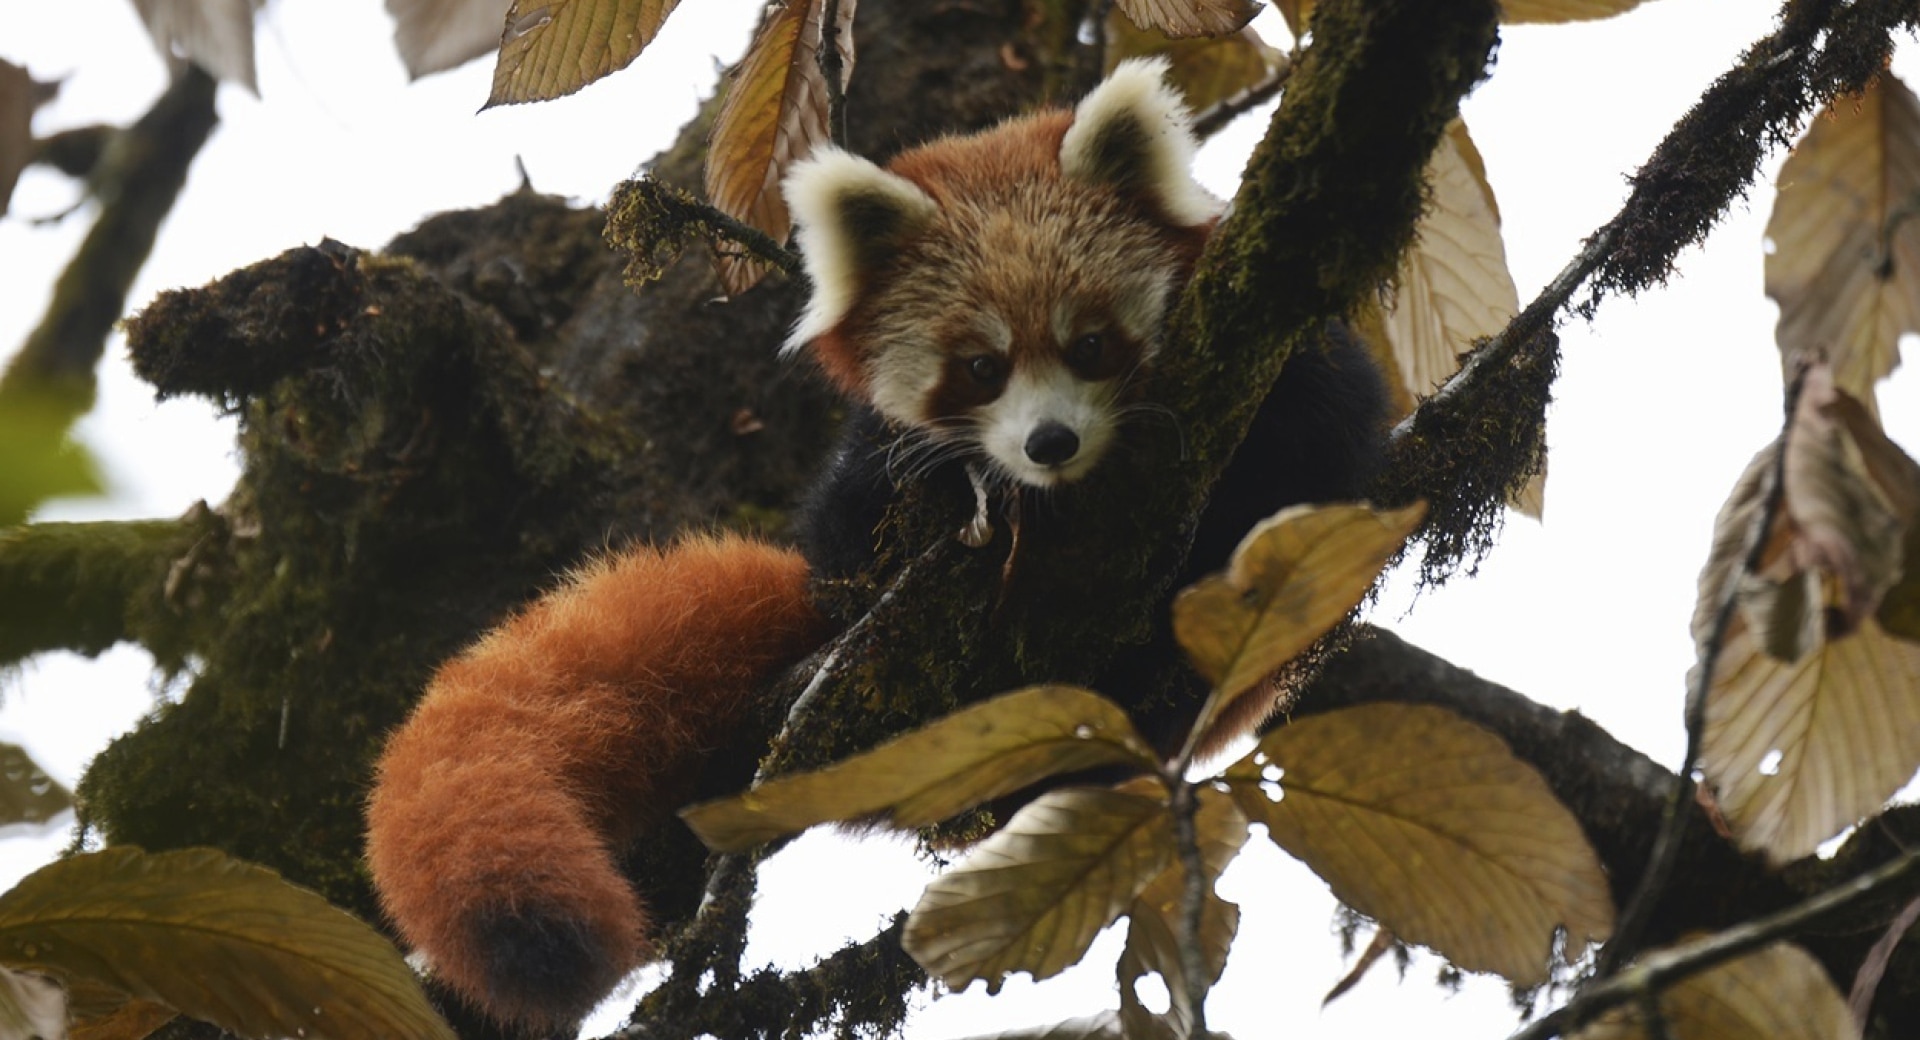 Space use, interaction and recursion in a solitary specialized herbivore: a red panda case study.